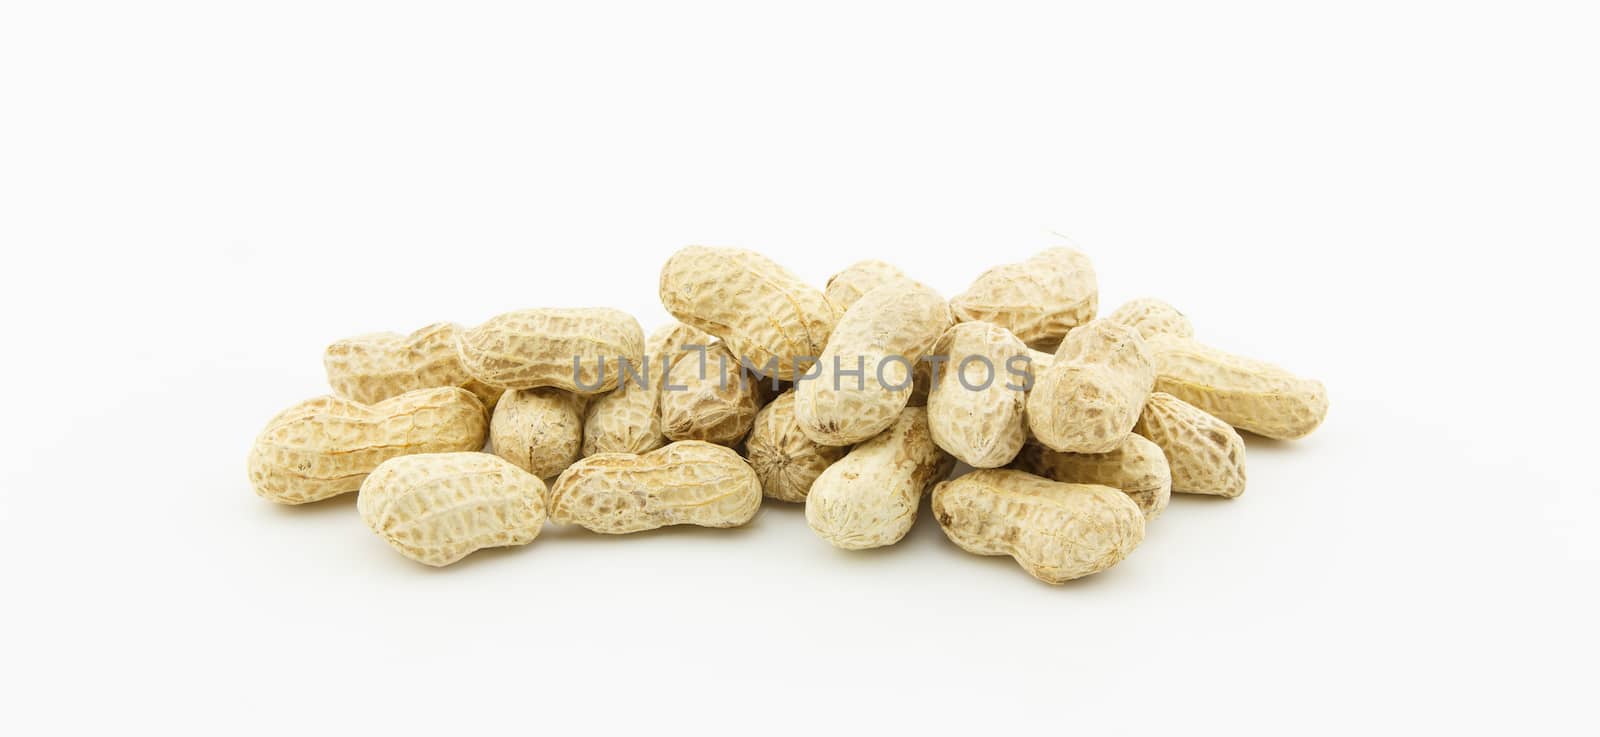 Dried peanuts on a white background